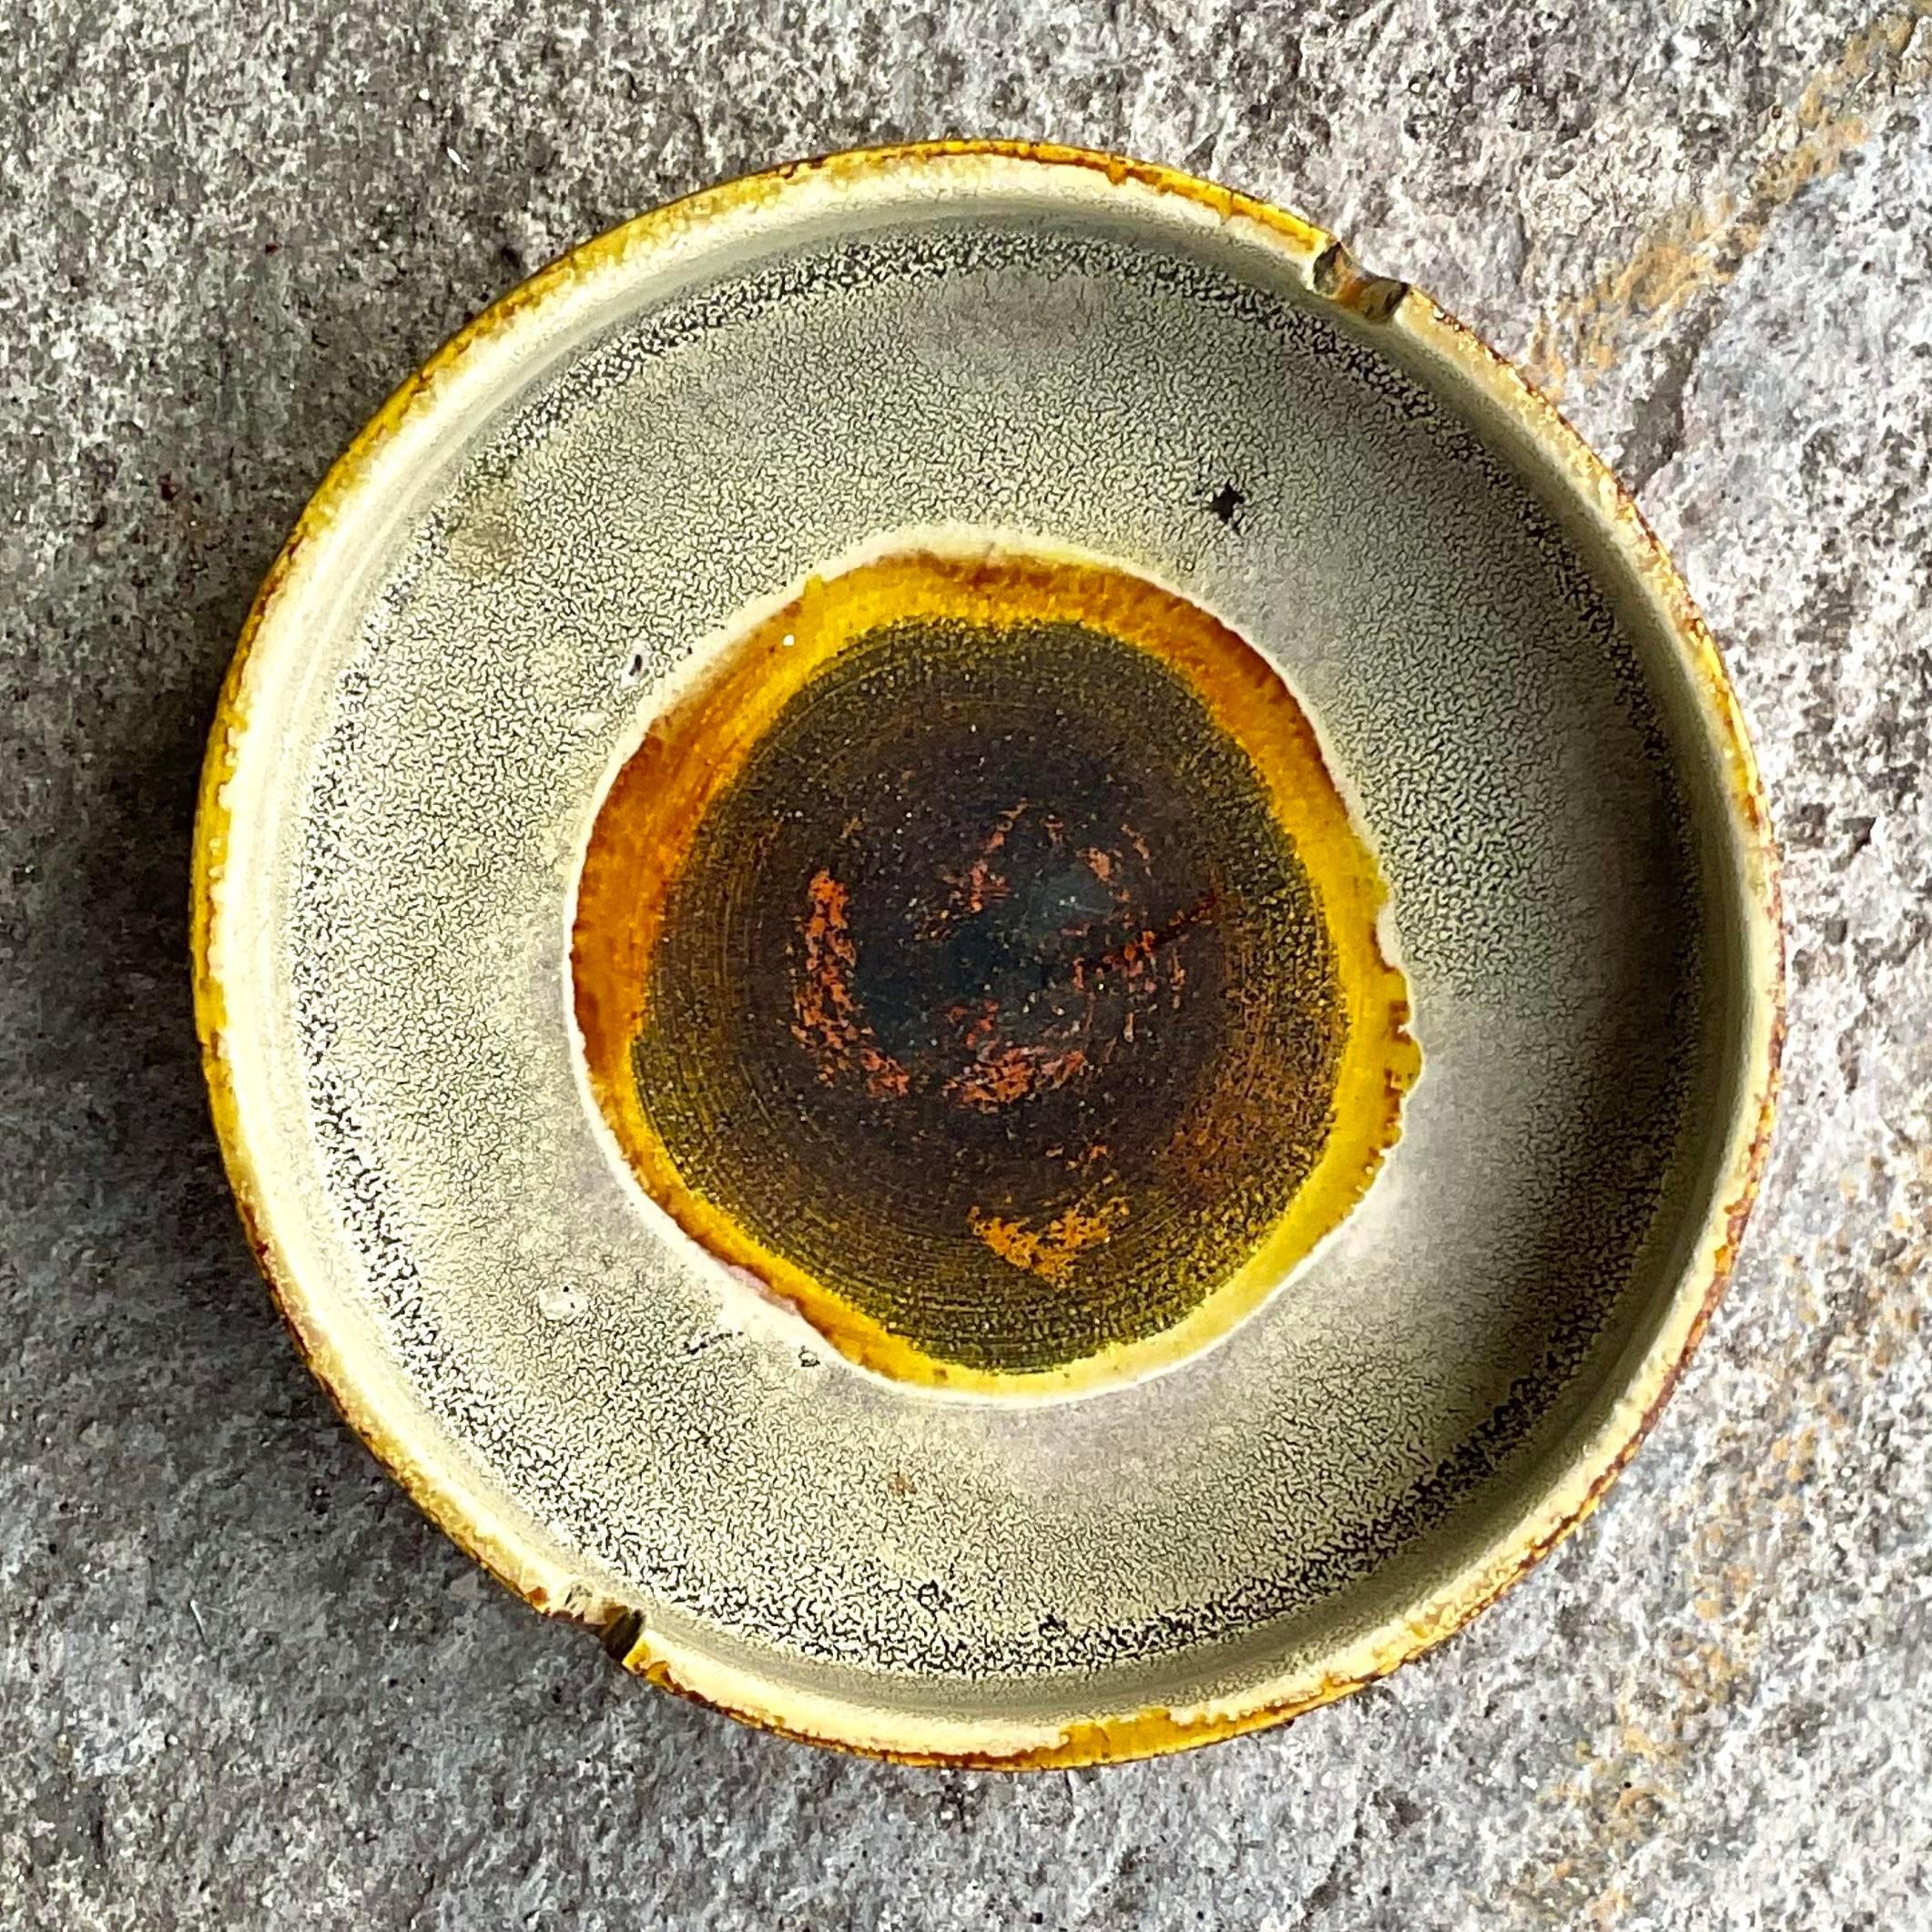 A fantastic vintage MCM ashtray. Made by the iconic Marcello Fantoni and signed on the bottom. Beautiful warm colors in an Abstract composition. Acquired from a Palm Beach estate.